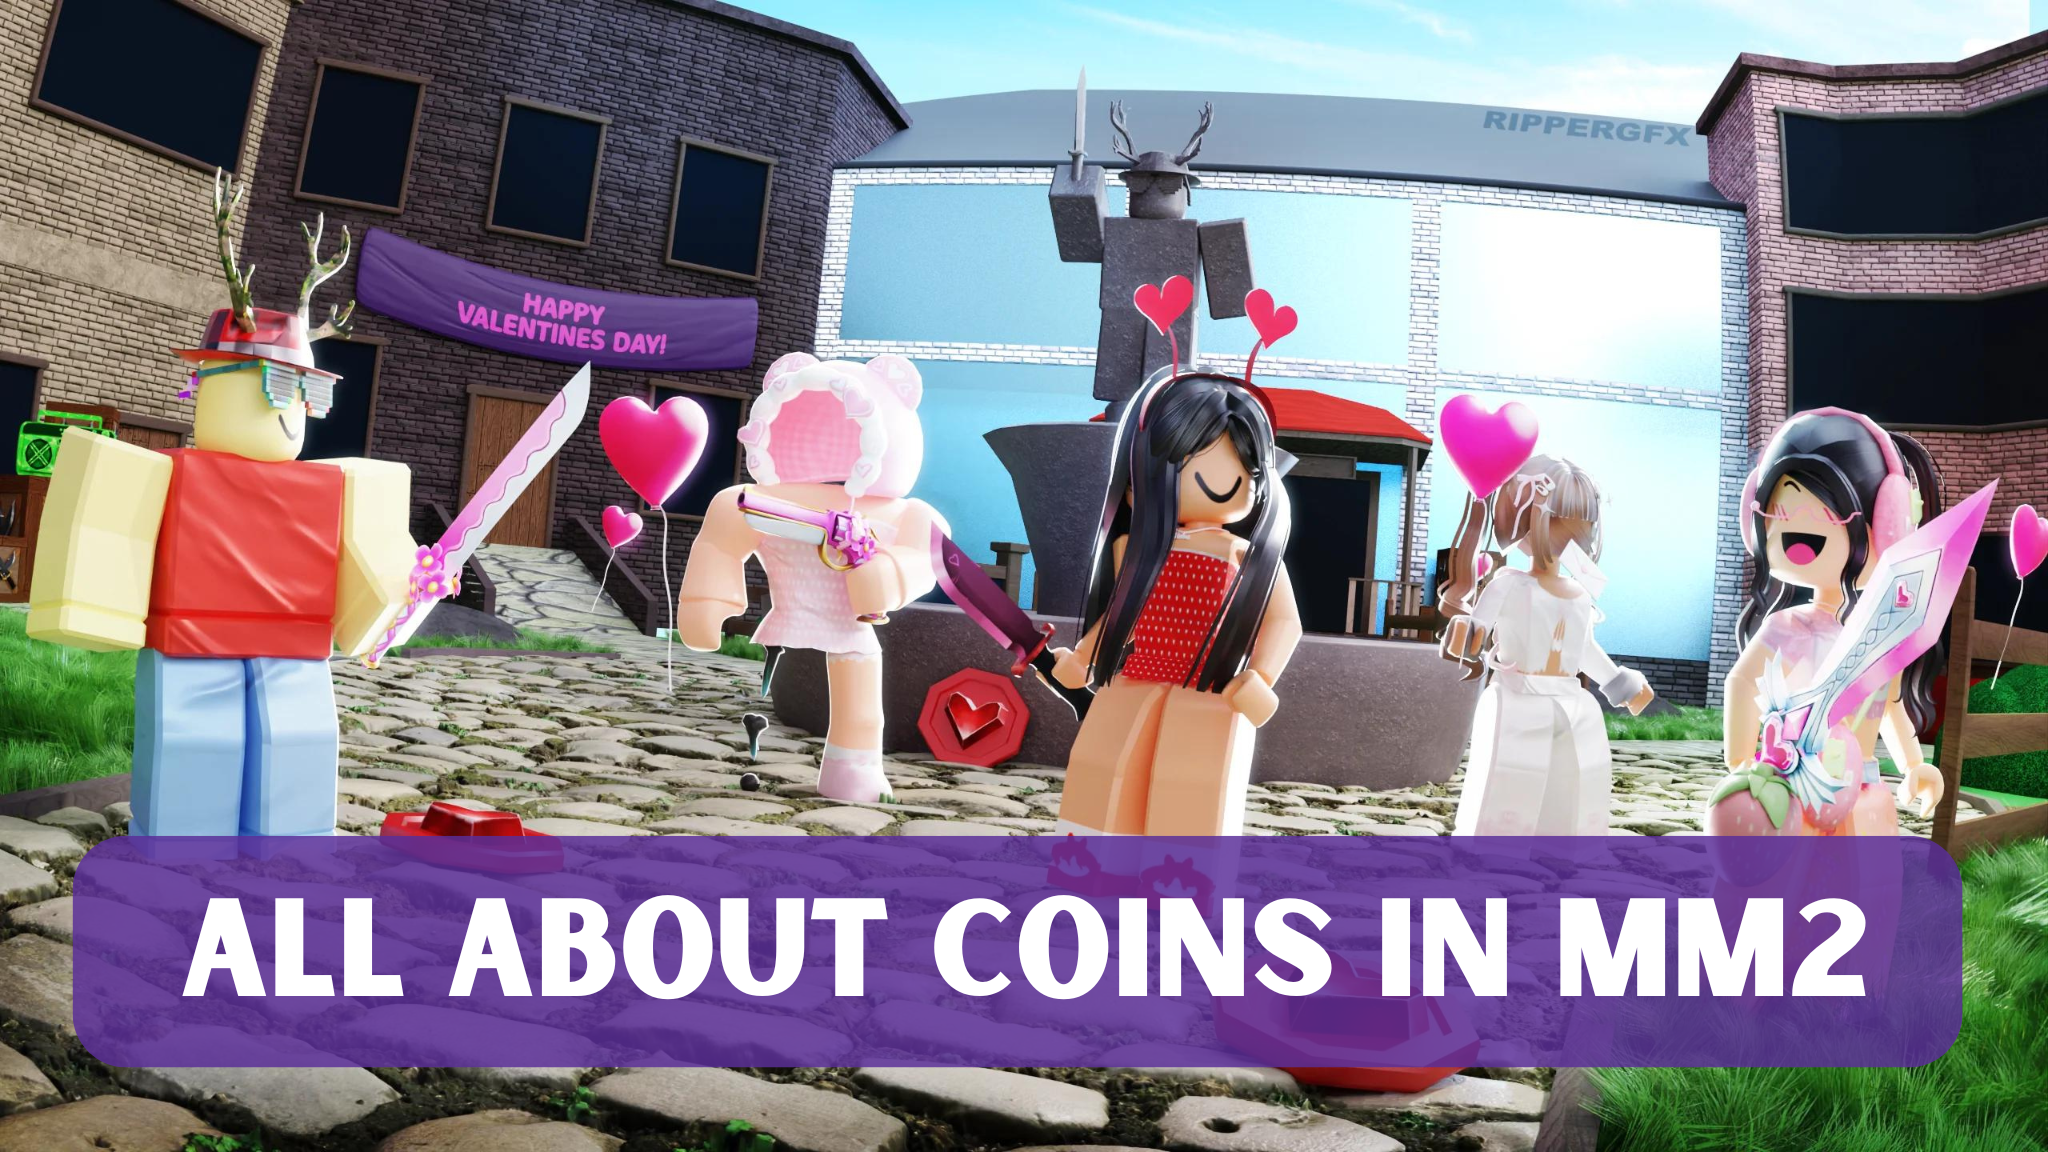 How to Earn Coins Quickly in MM2 and How to Use Them Wisely